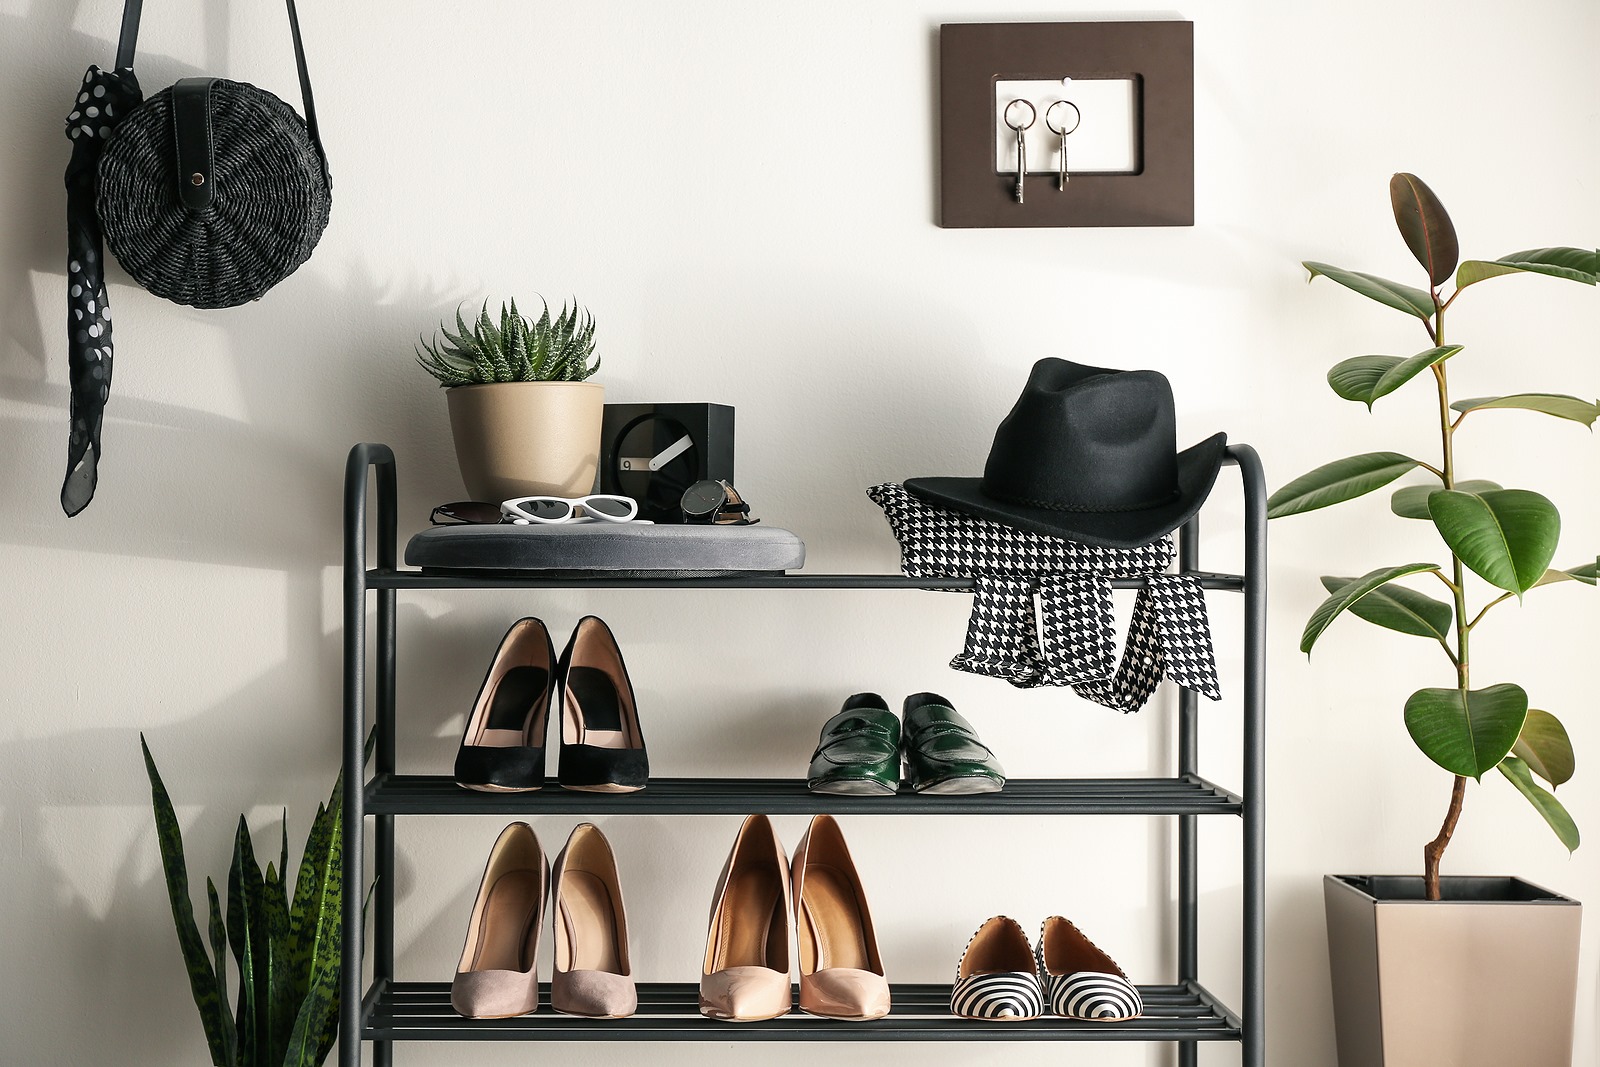 5 Outstanding Advantages Of Shoe Storage For Under Stairs